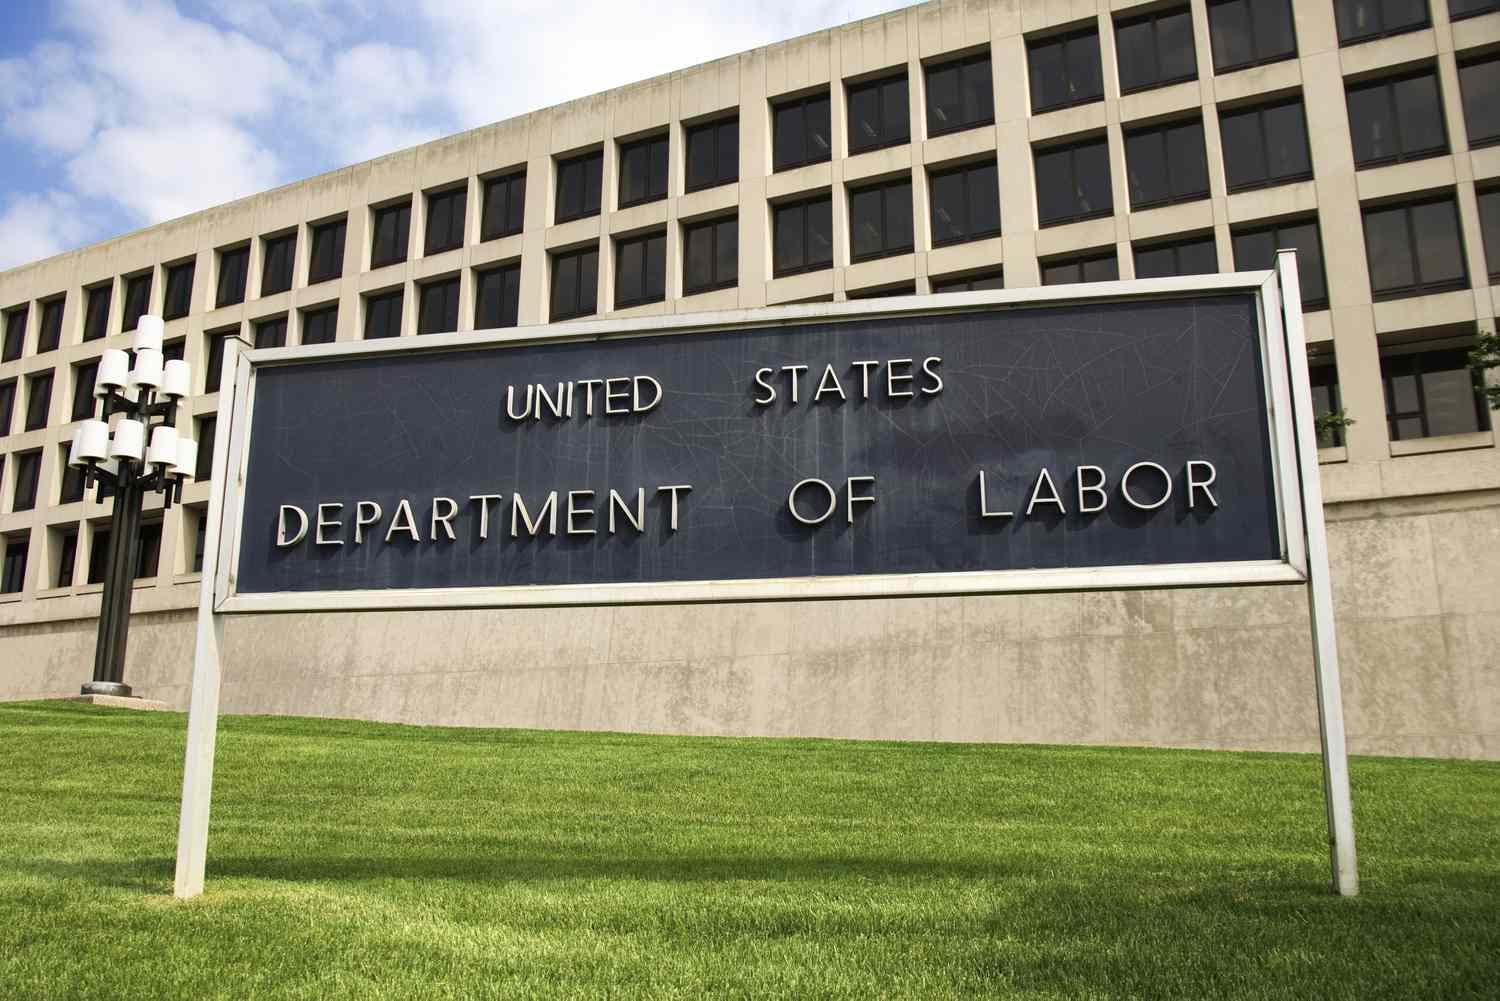 From 2017 to 2020, the U.S. Department of Labor recovered $3 billion in stolen wages from employers